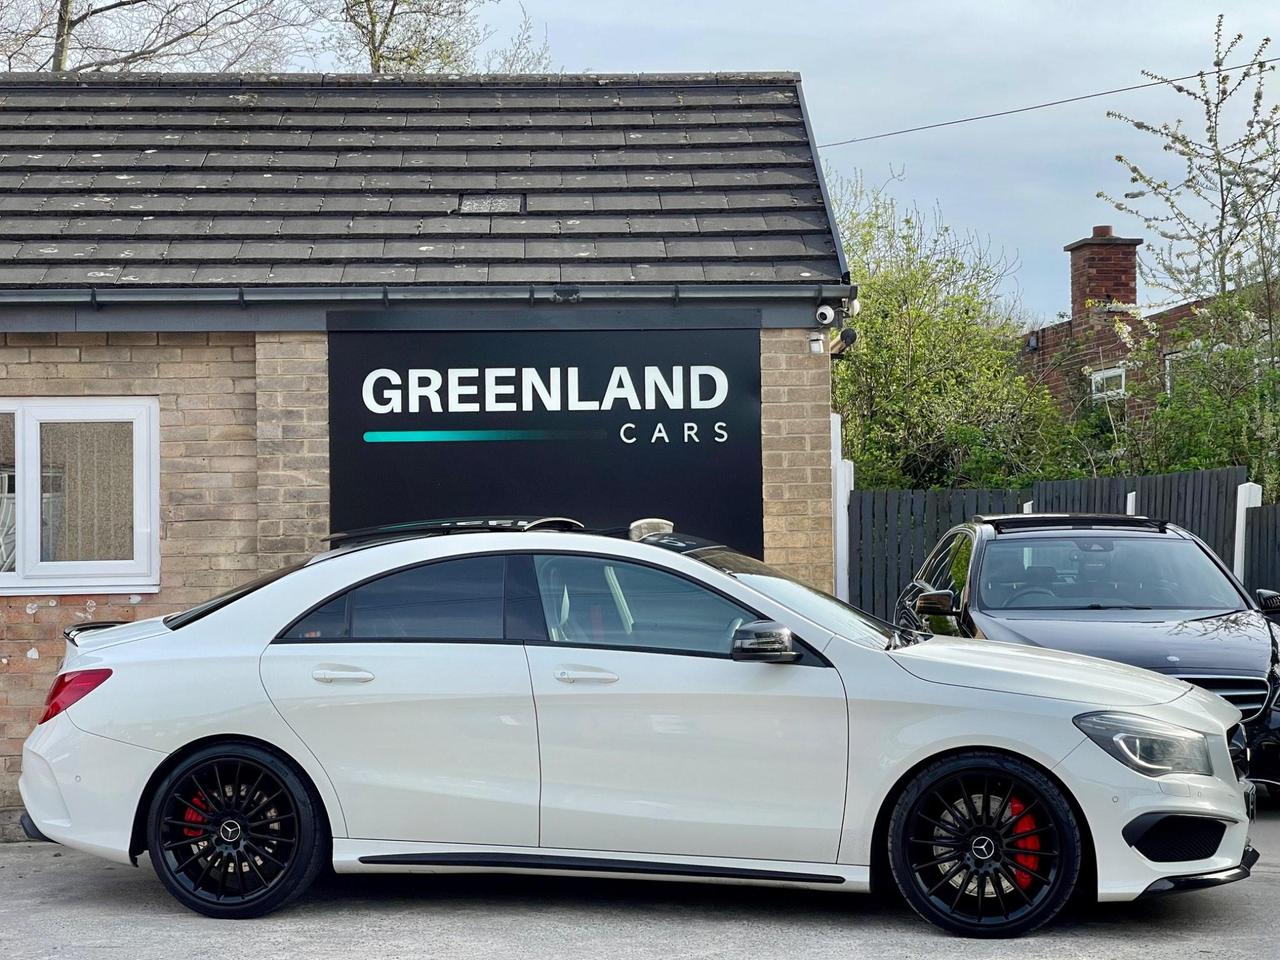 Used 2015 Mercedes-Benz CLA Class for sale in Sheffield